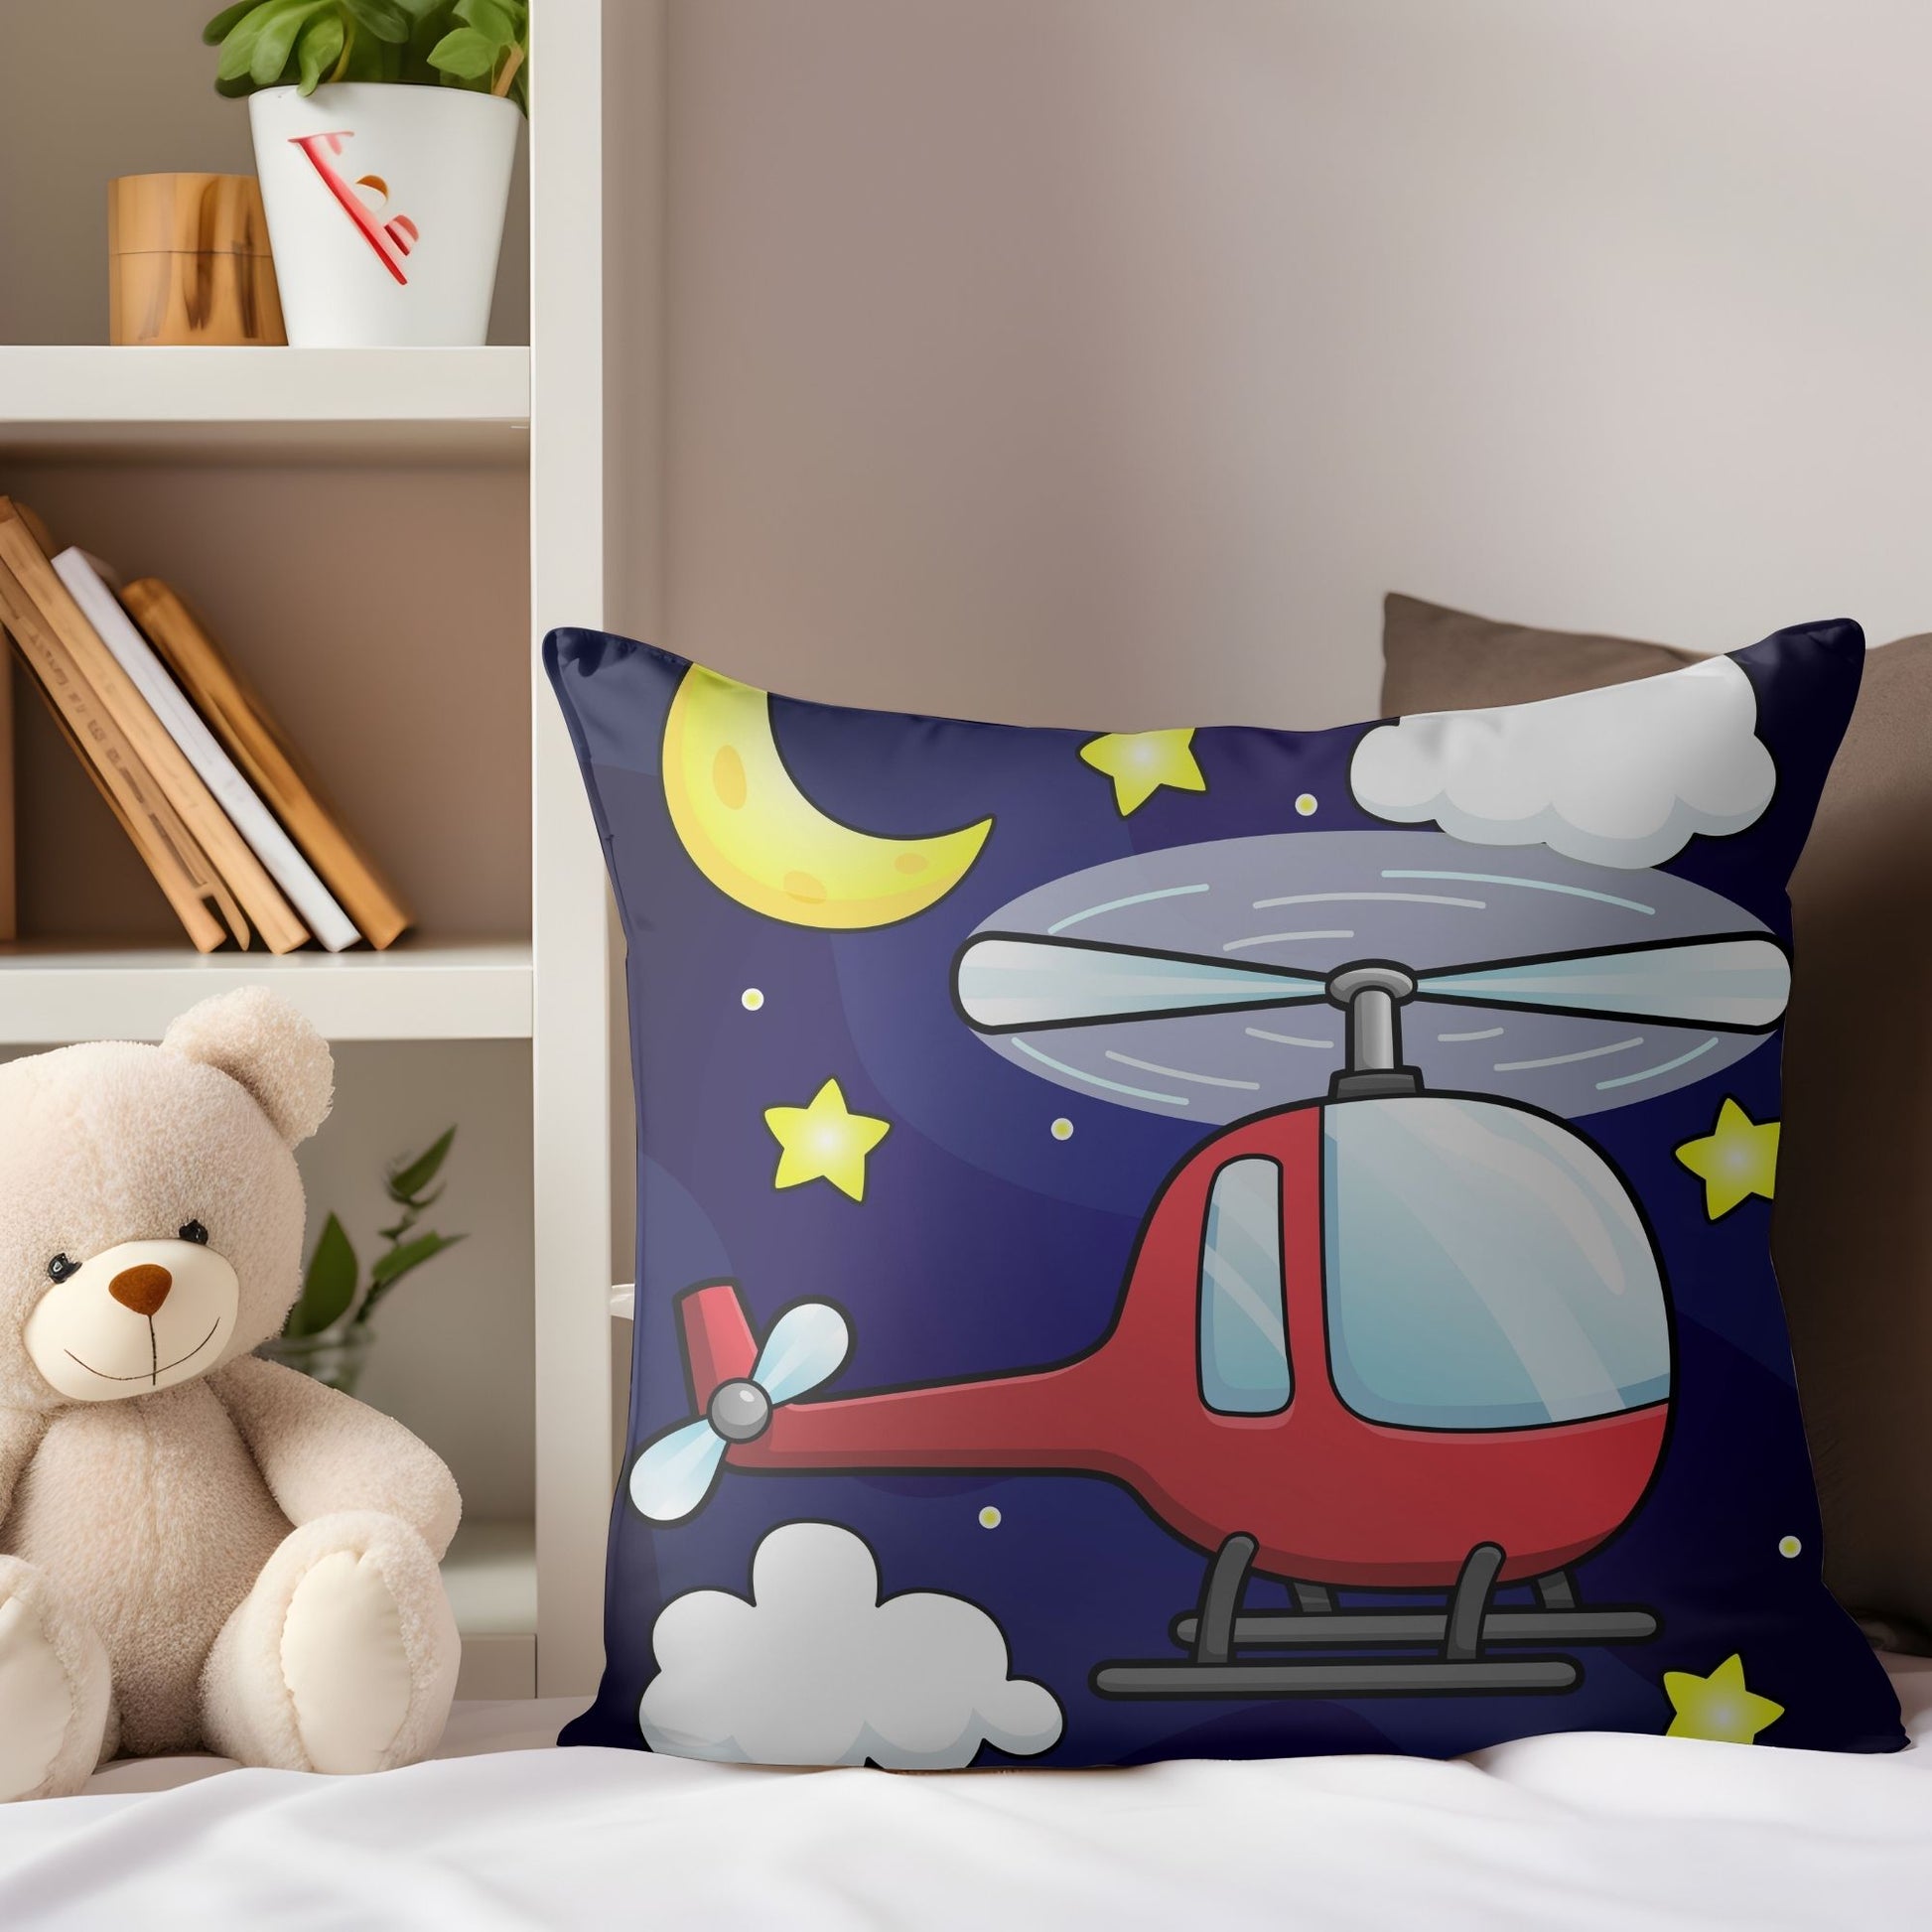 Soft pillow featuring a red helicopter design for children's bedrooms.